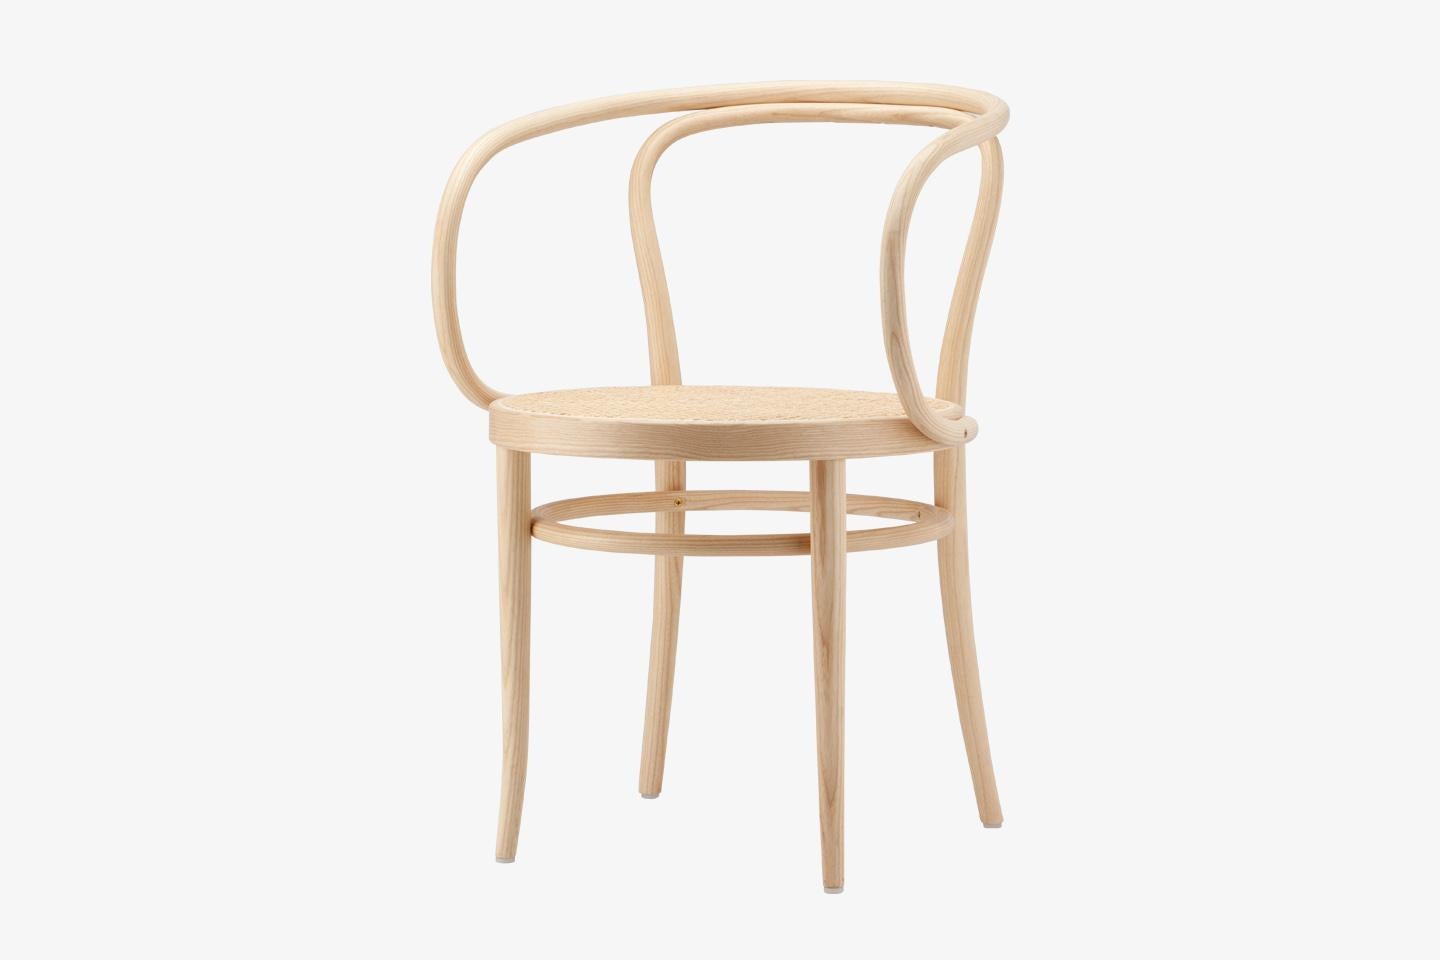 Customizable 209 Bentwood Chair by Gebrüder T, 1819 For Sale 5